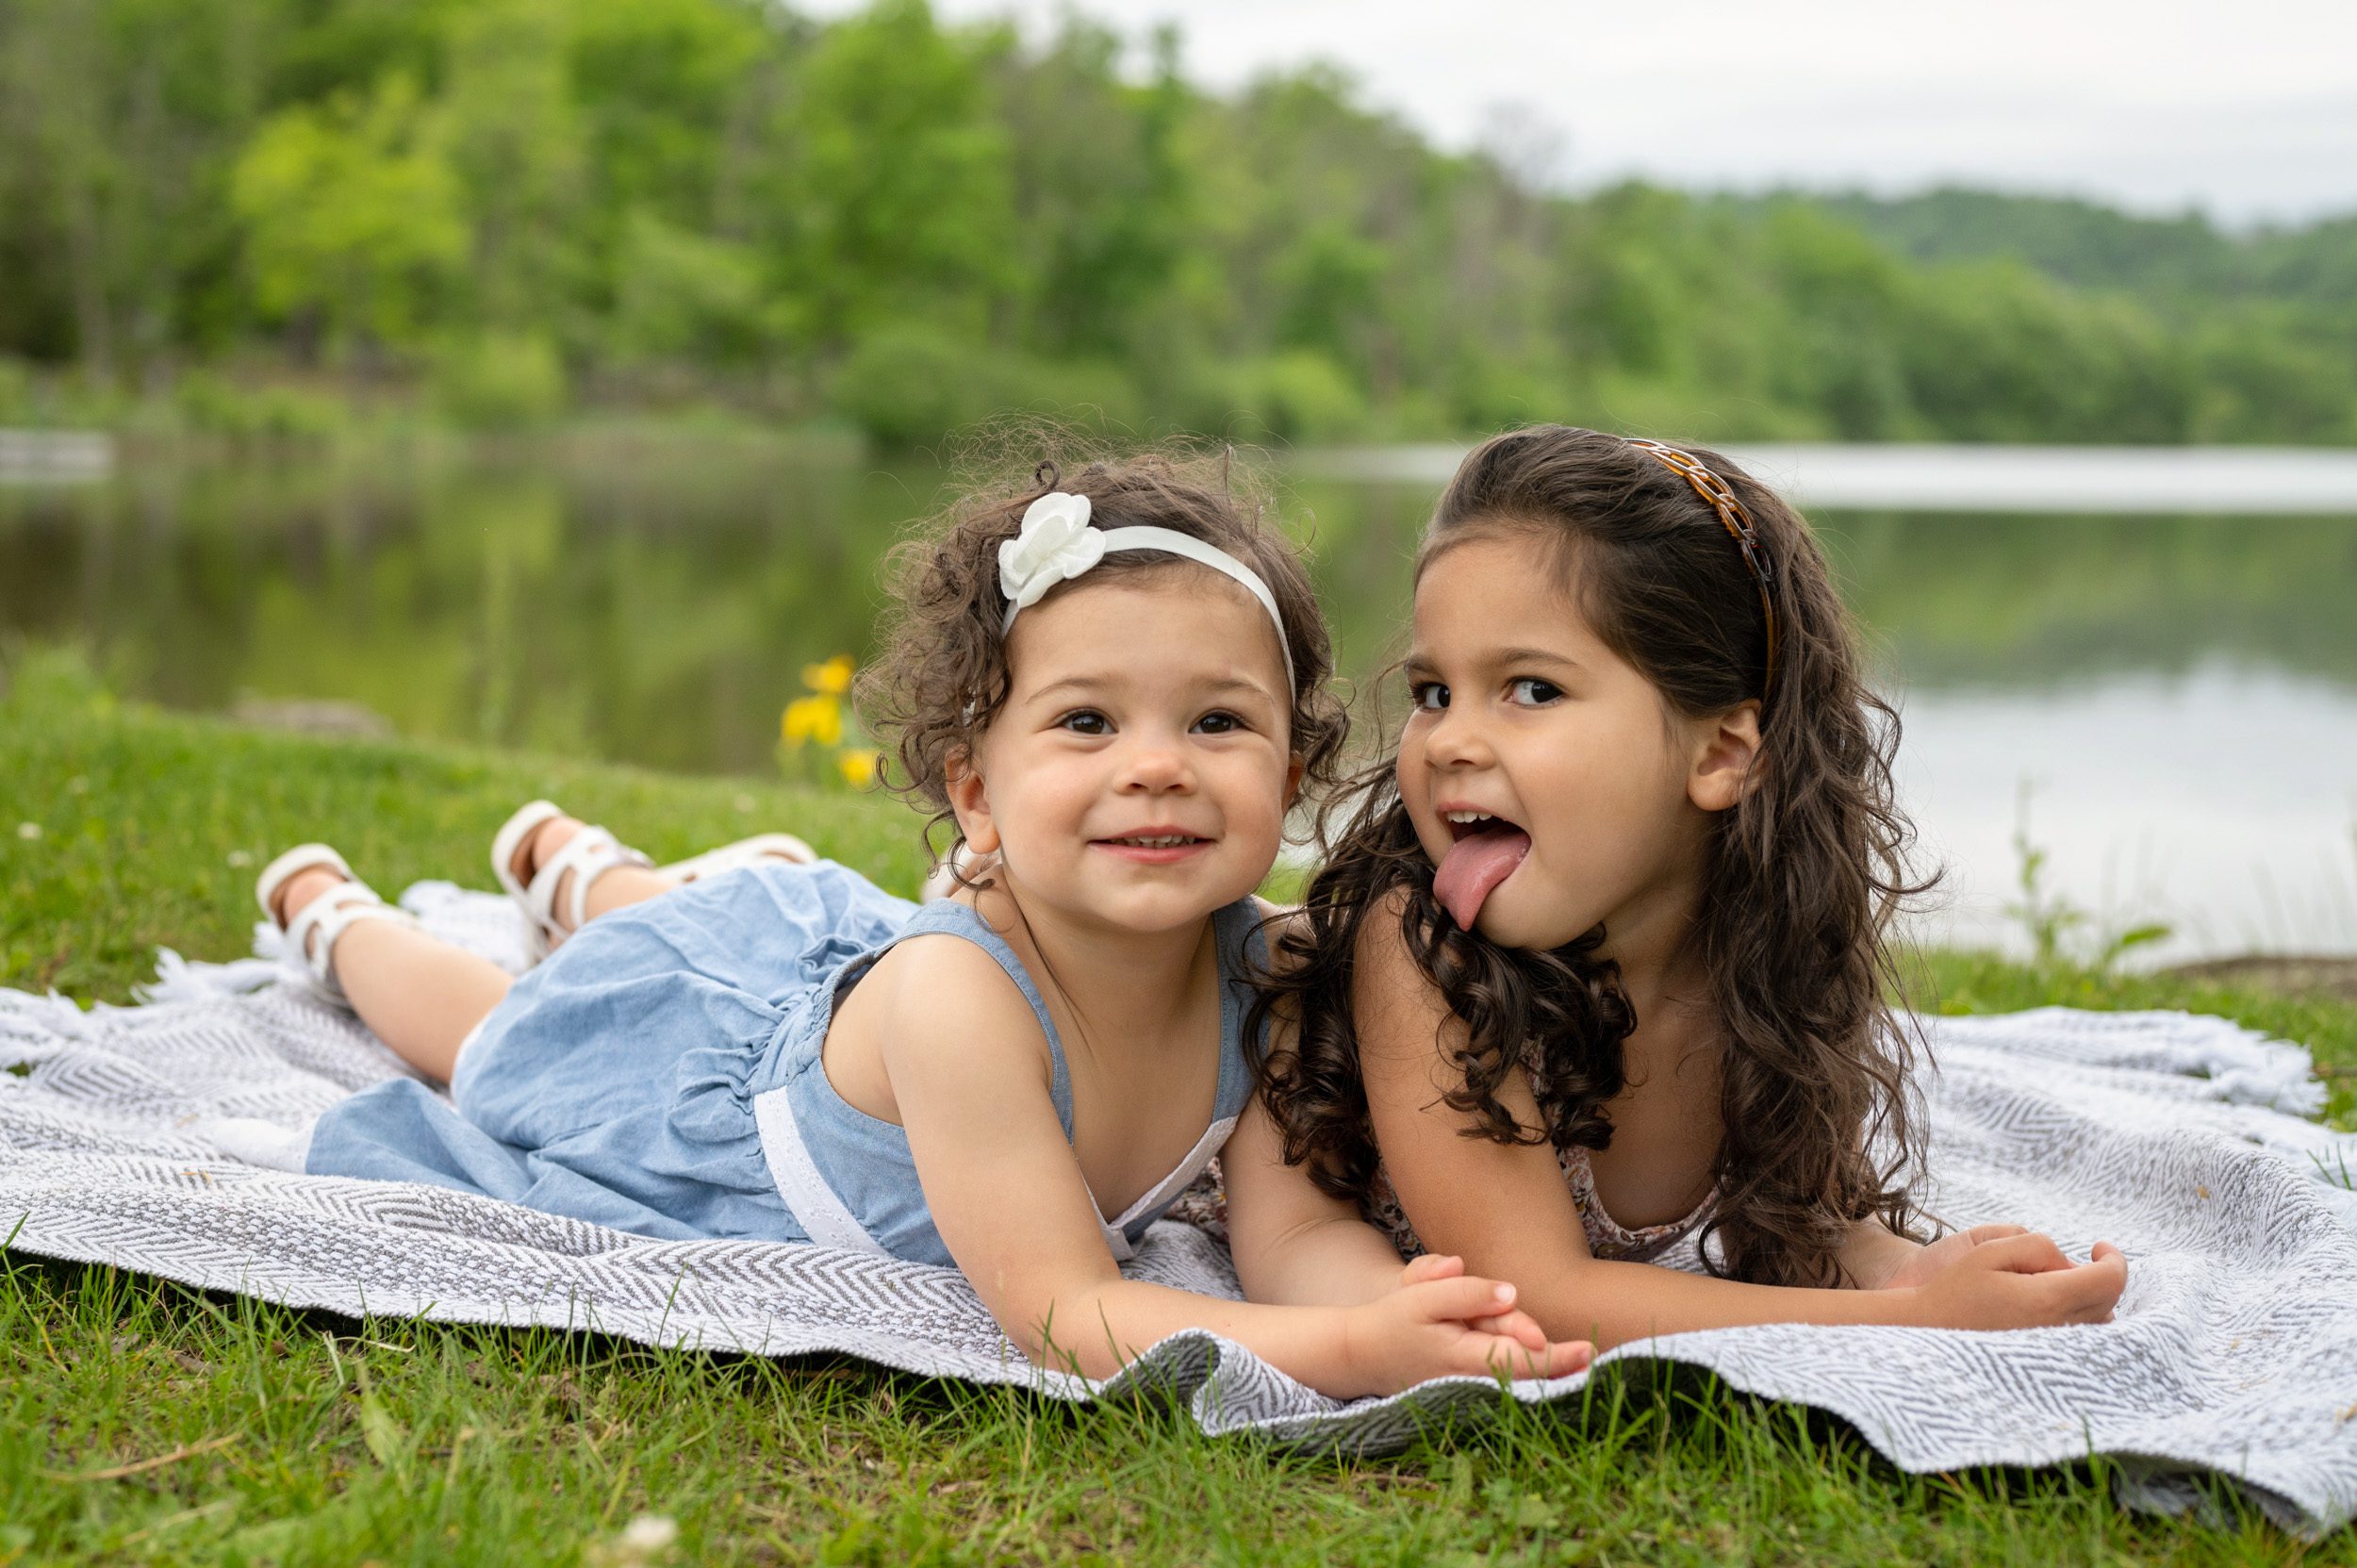 Two sisters laying next to each other on a blanket in front of a lake while one sister sticks out her tongue and the other sister smiles during a family photoshoot